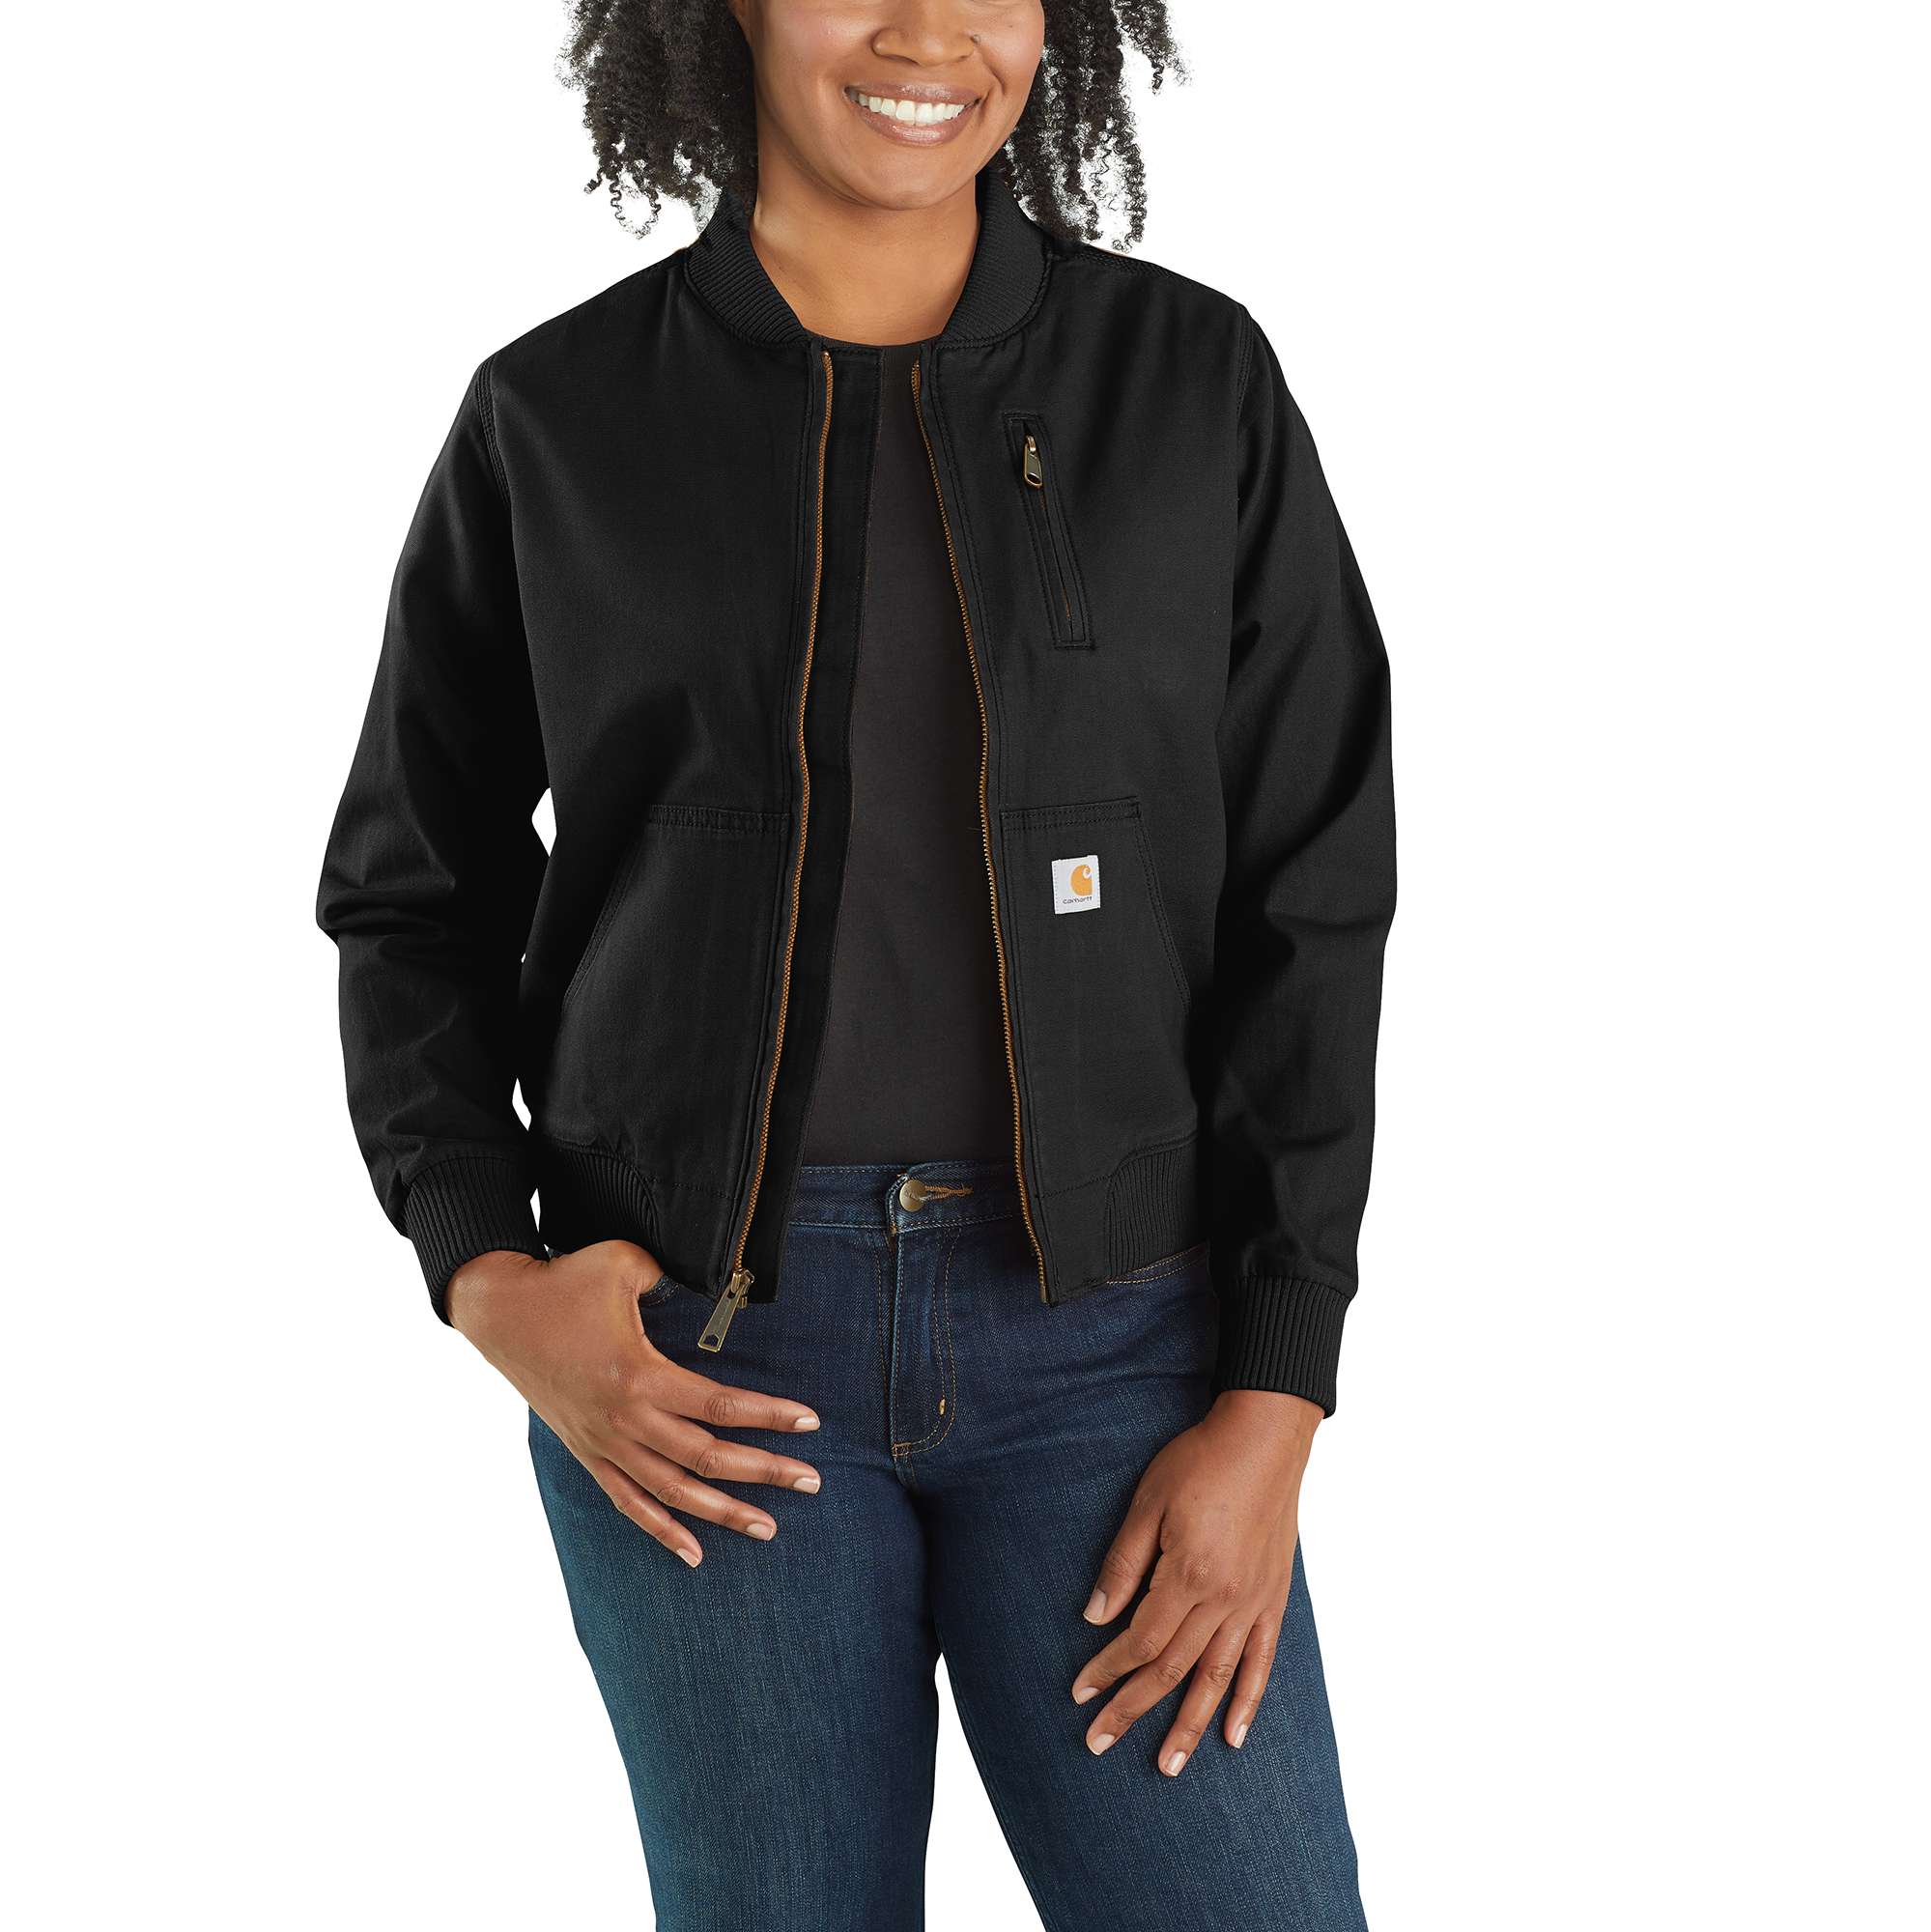 Canvas Work Jackets & Coats at Lowes.com